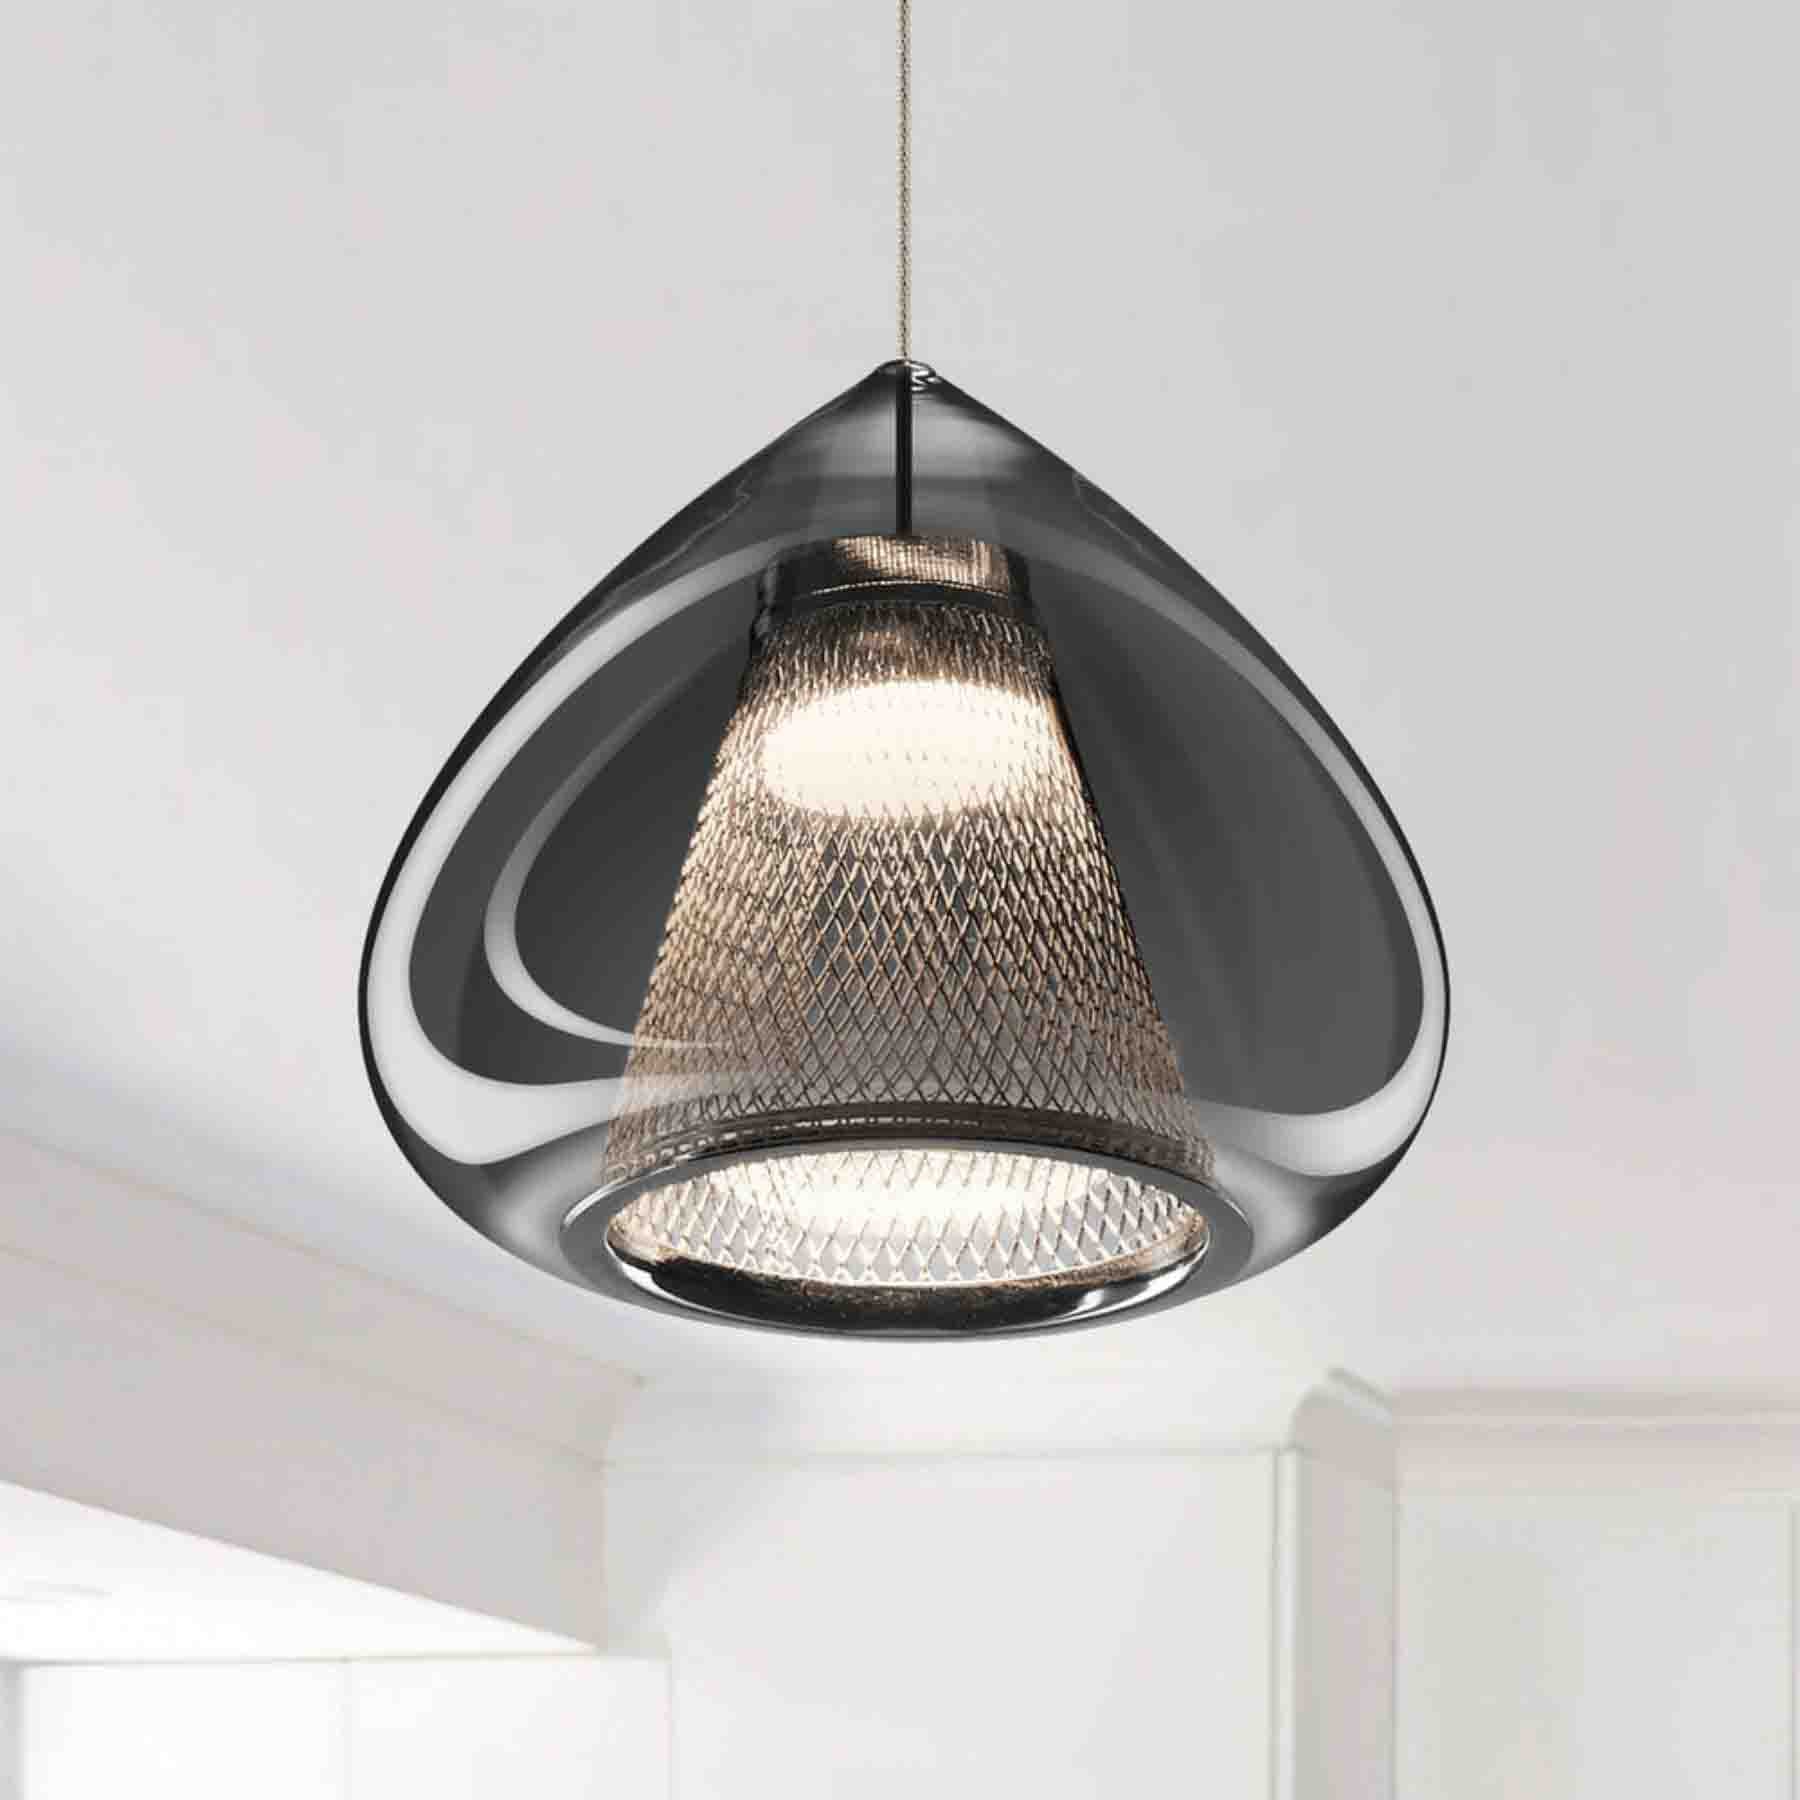 while its illumination may not be intense it serves as an ideal decorative piece for your interior